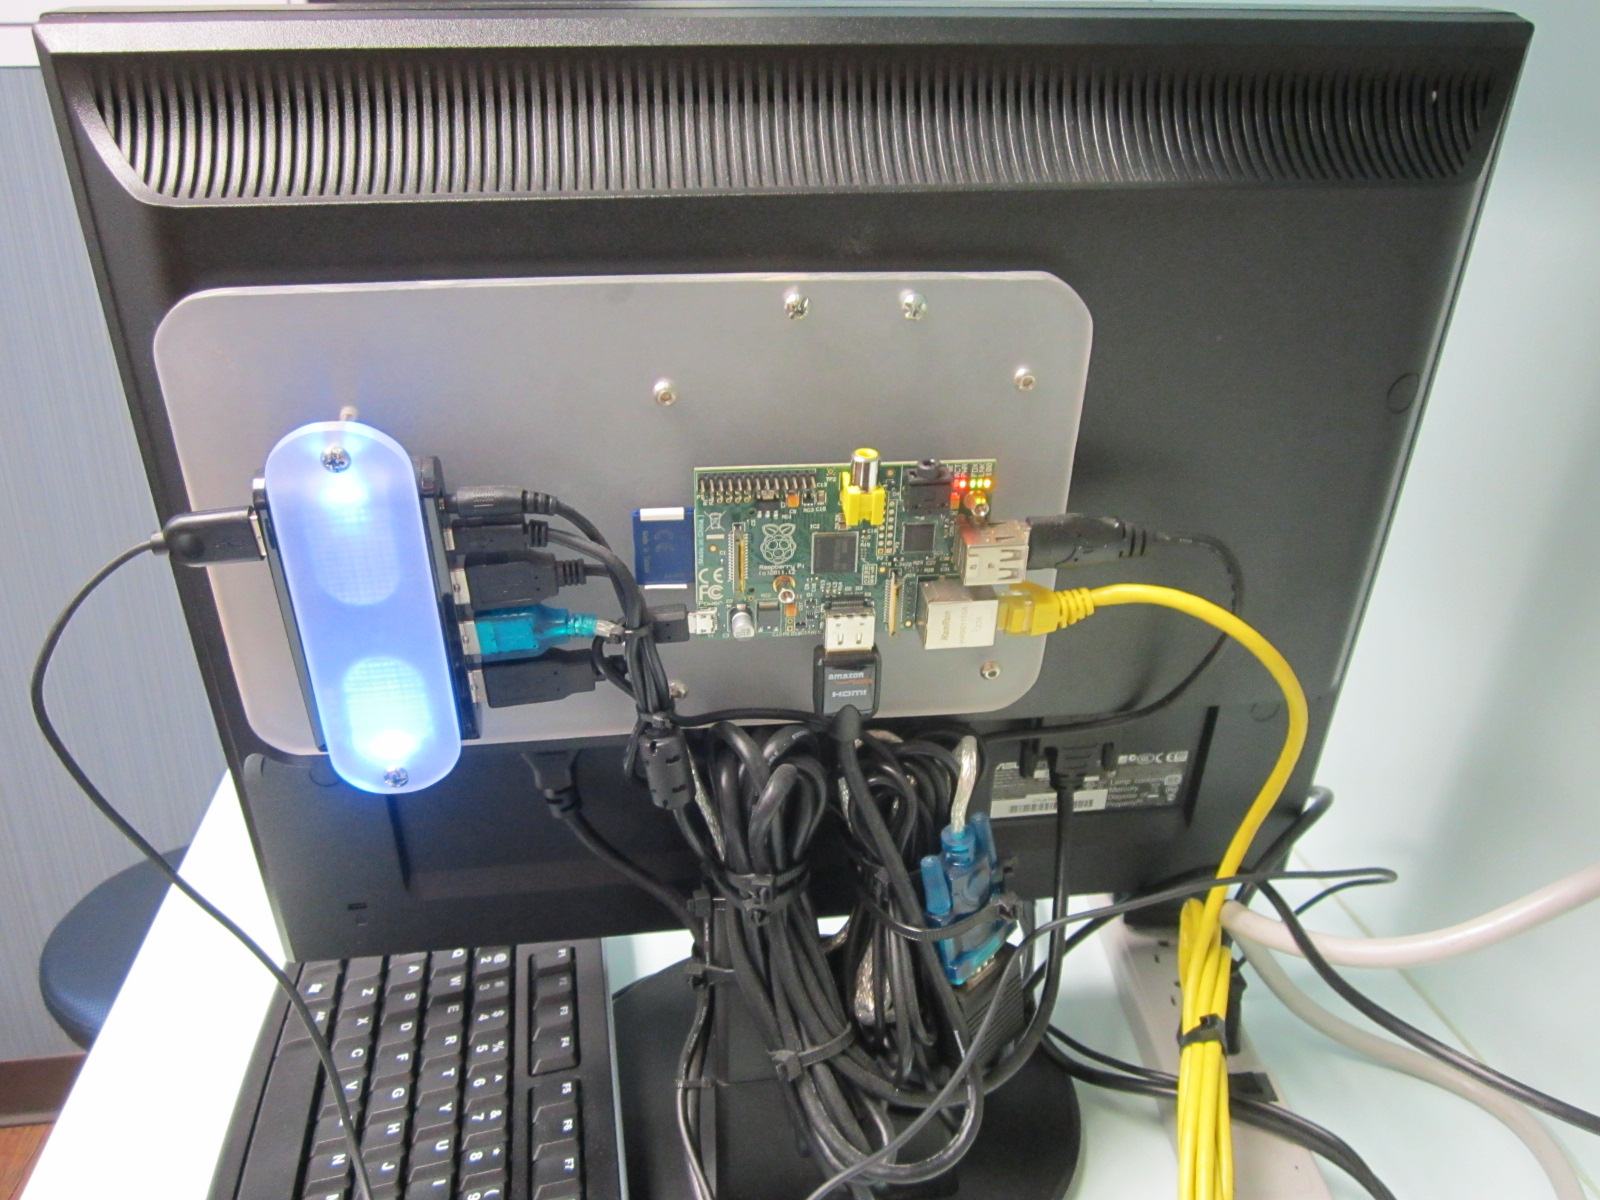 Raspberry PI attached to the back of a Monitor with RFID